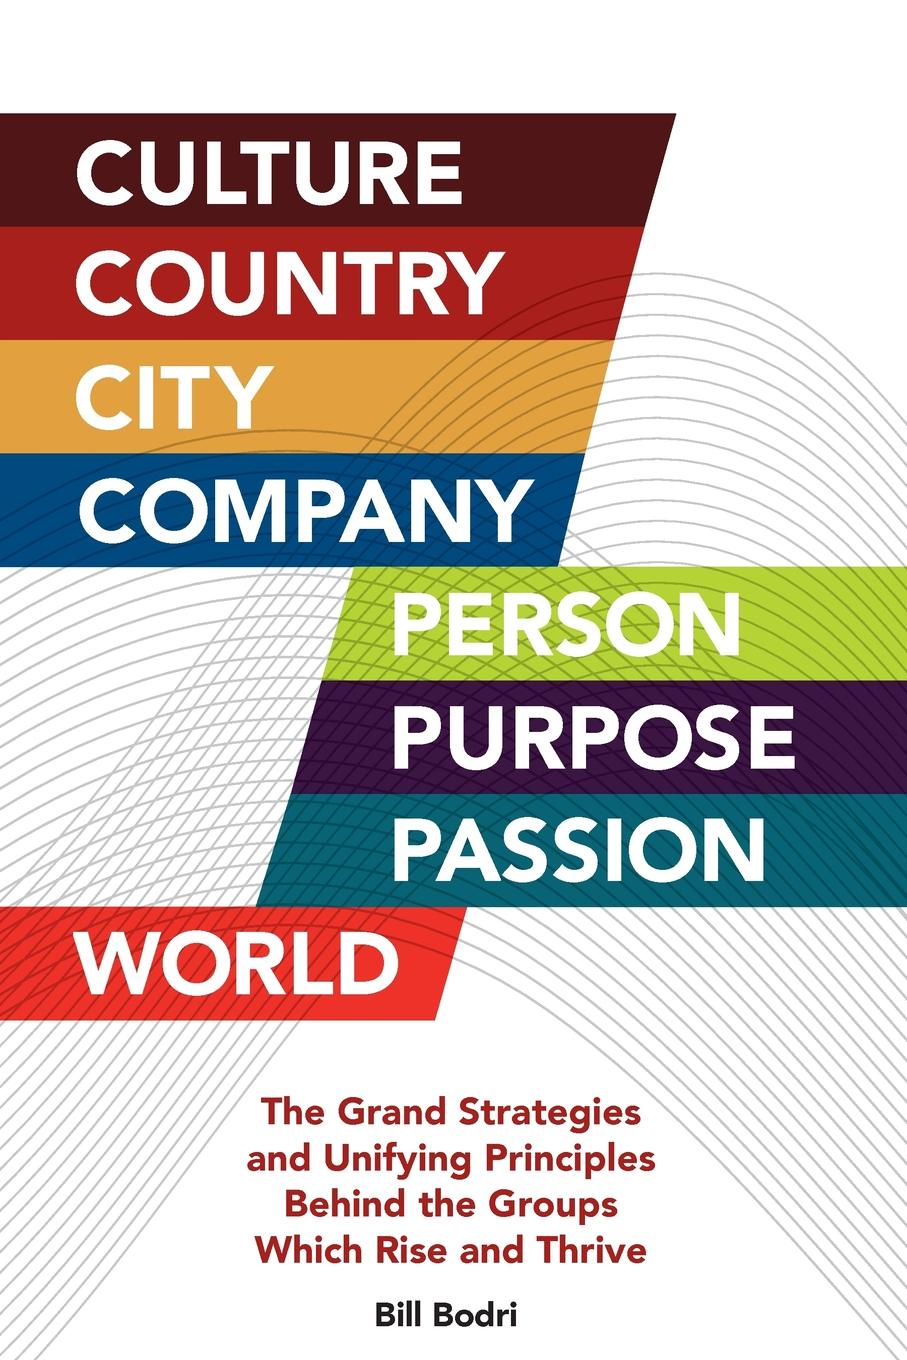 Culture, Country, City, Company, Person, Purpose, Passion, World. The Grand Strategies and Unifying Principles Behind the Groups Which Rise and Thrive